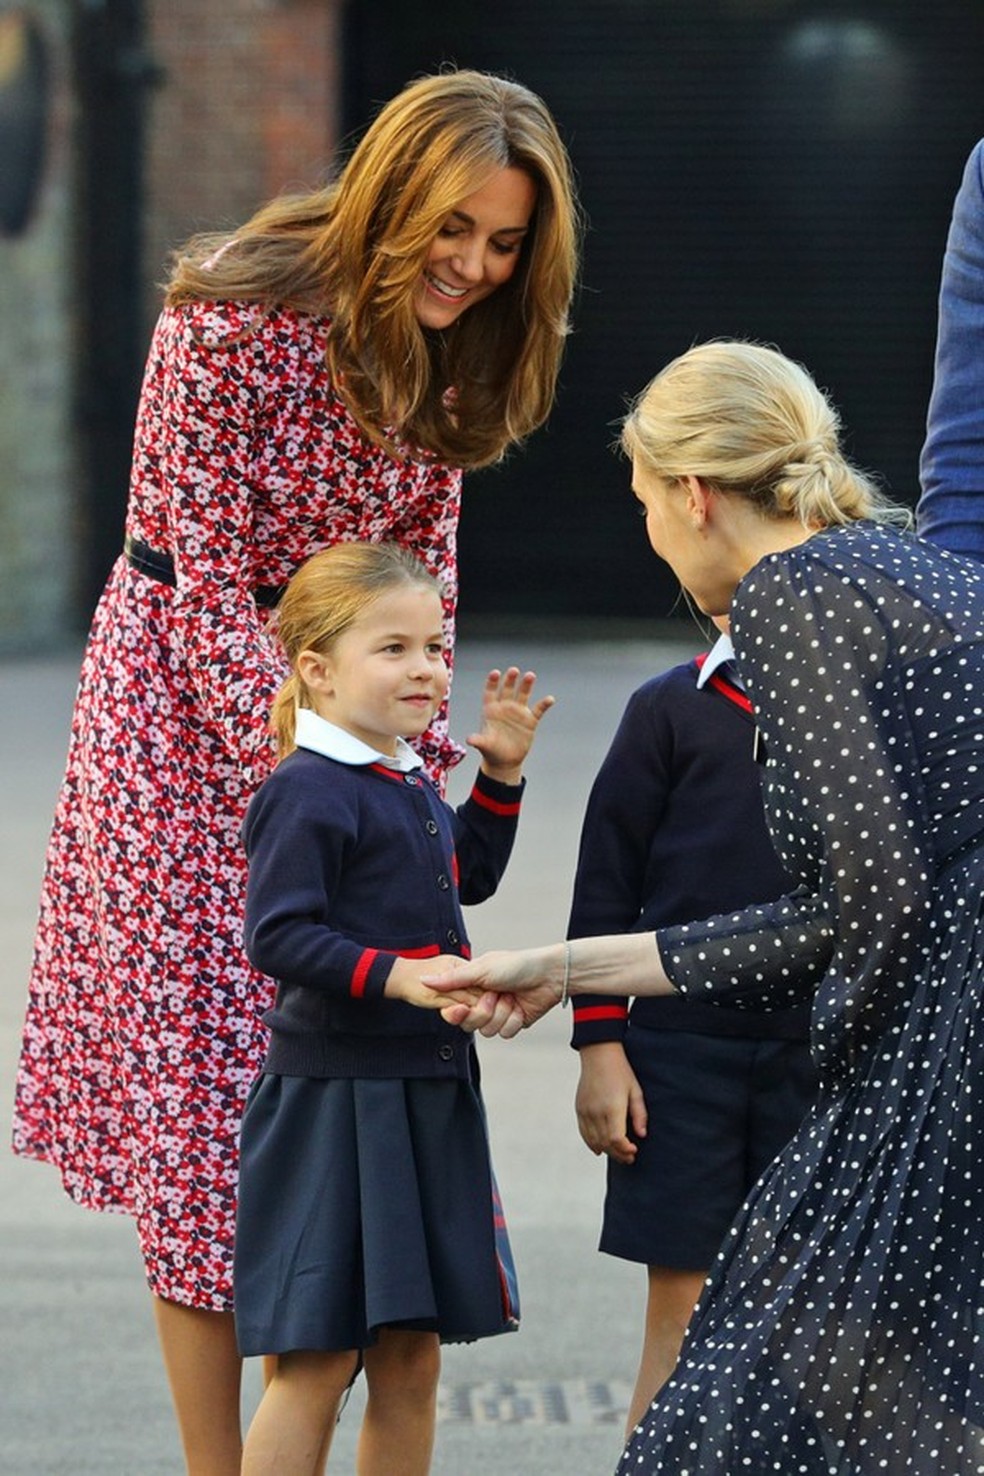 LONDON, UNITED KINGDOM - SEPTEMBER 5: Helen Haslem, head of the lower school greets Princess Charlotte as she arrives for her first day of school, with her brother Prince George and her parents the Duke and Duchess of Cambridge, at Thomas's Battersea in L (Foto: Getty Images) — Foto: Glamour